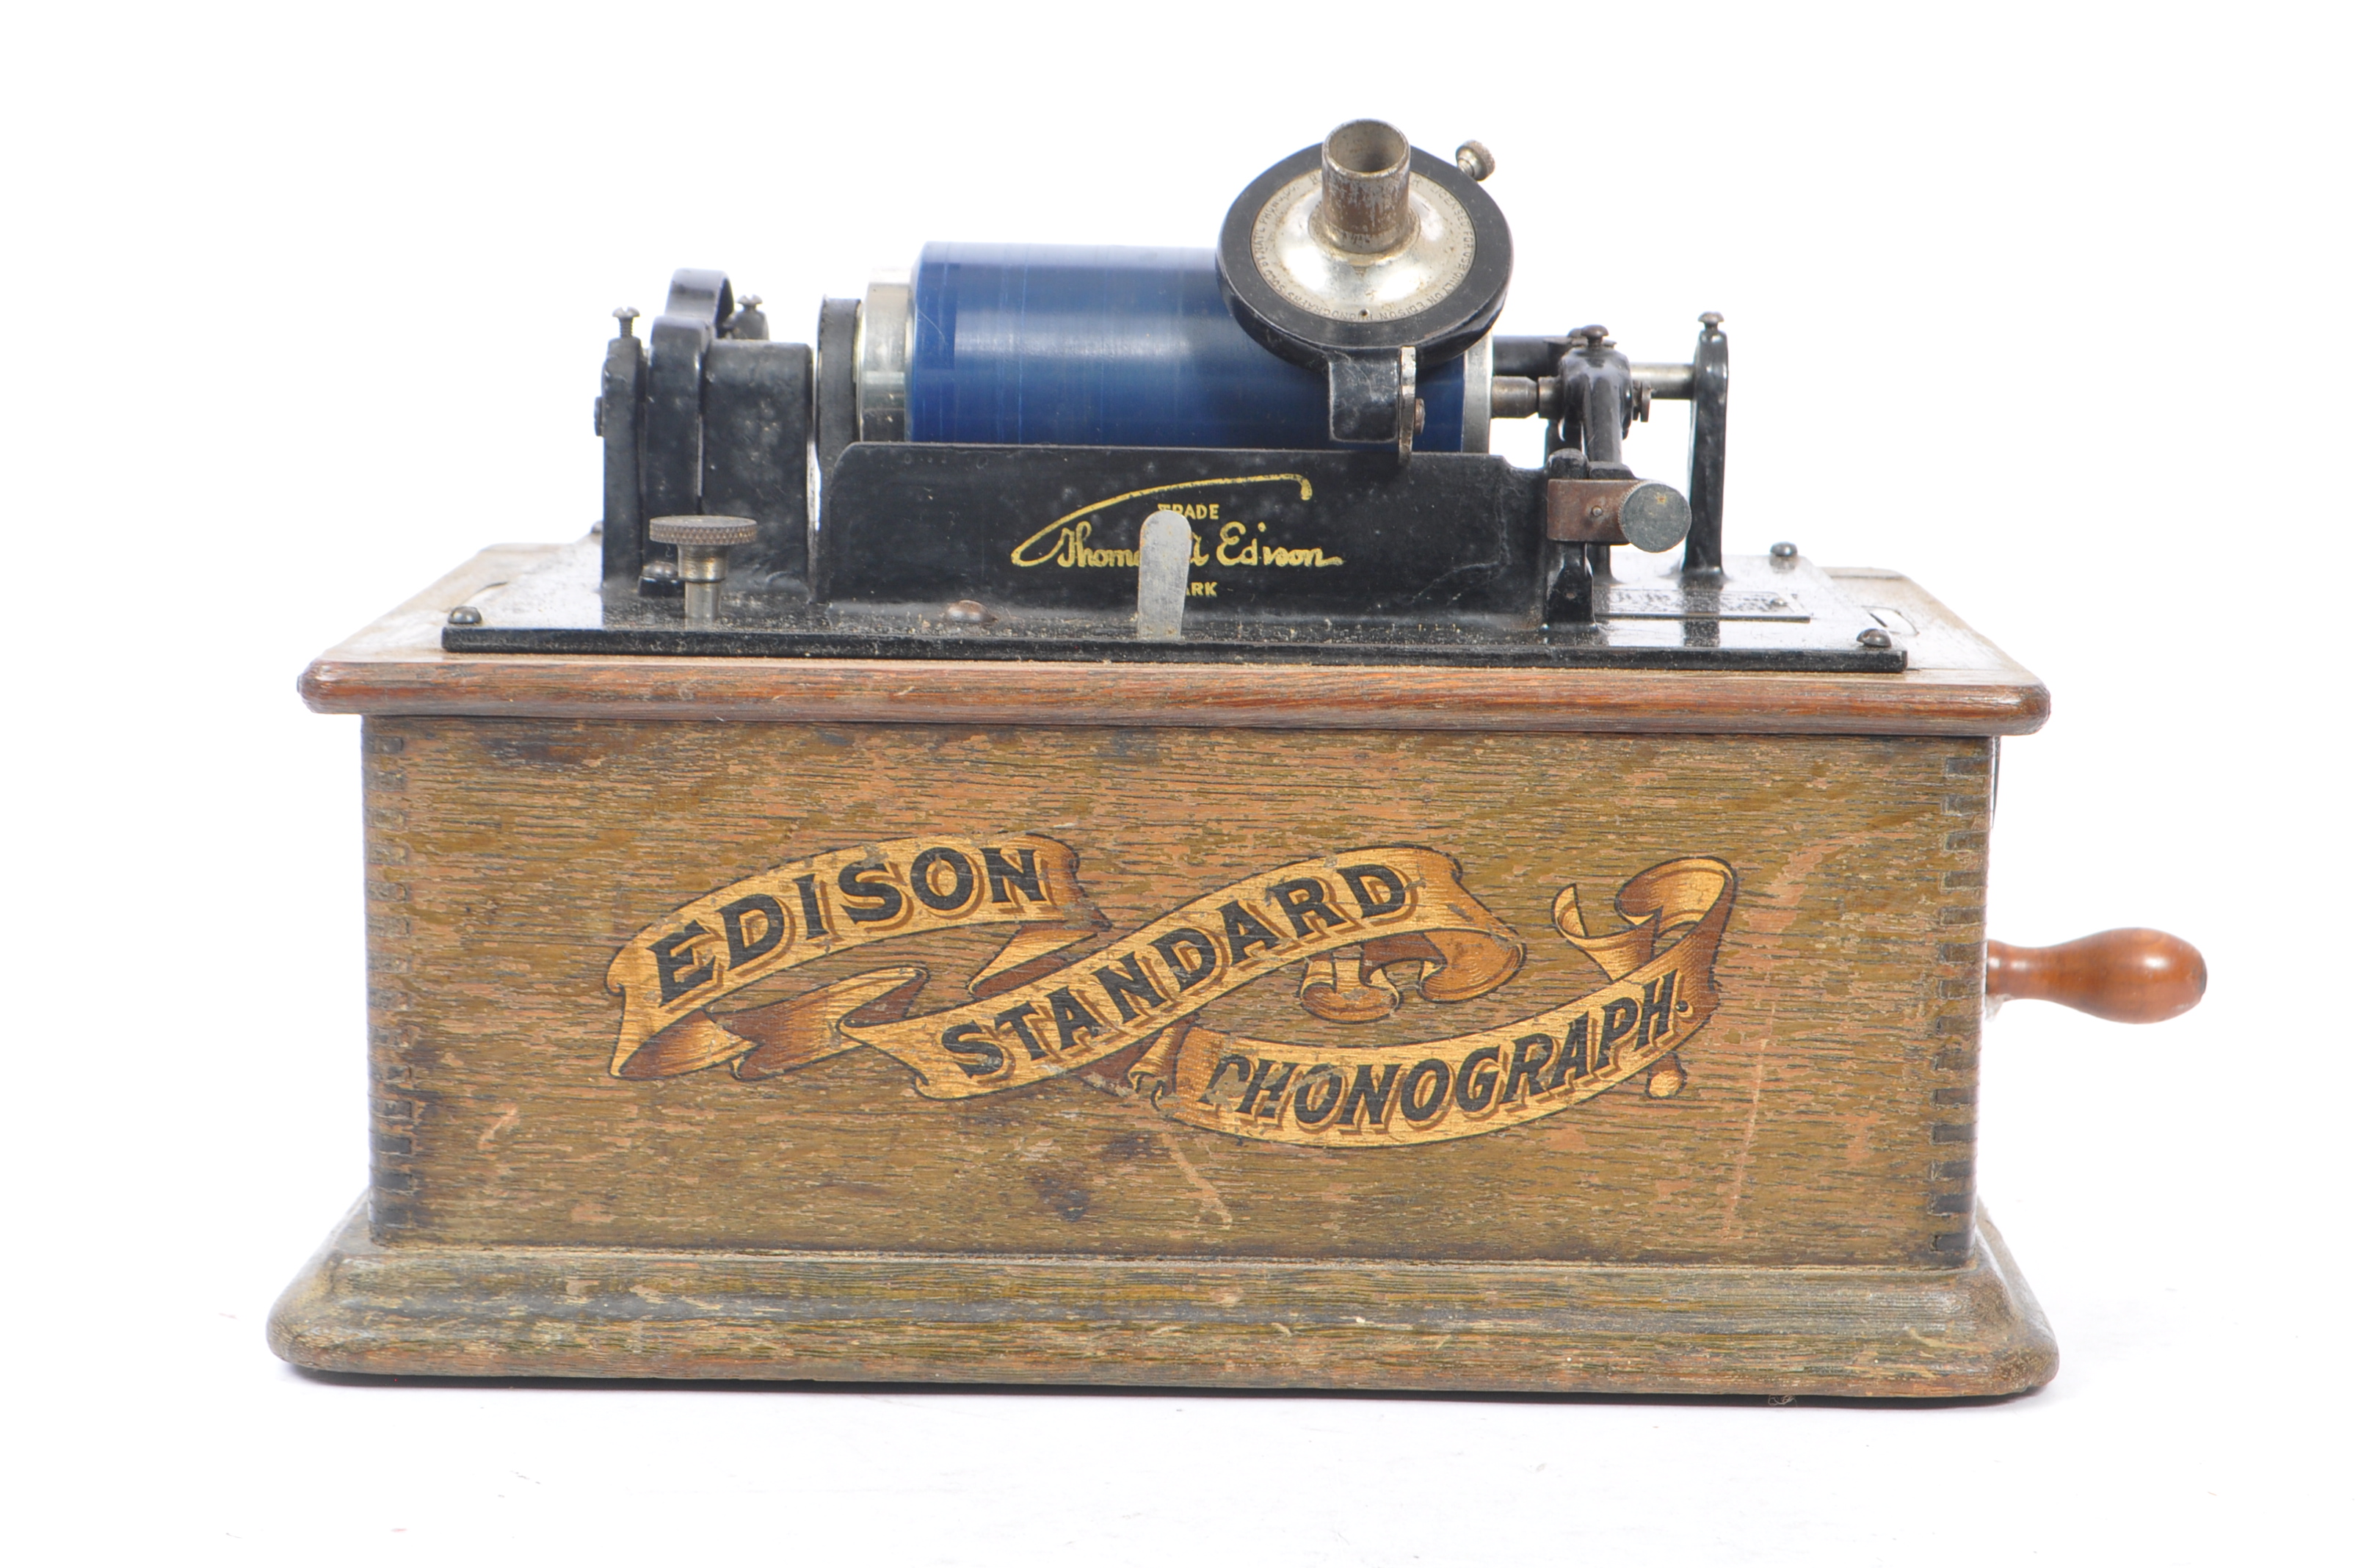 EDISON STANDARD PHONOGRAPH - EARLY 20TH CENTURY - Image 2 of 8